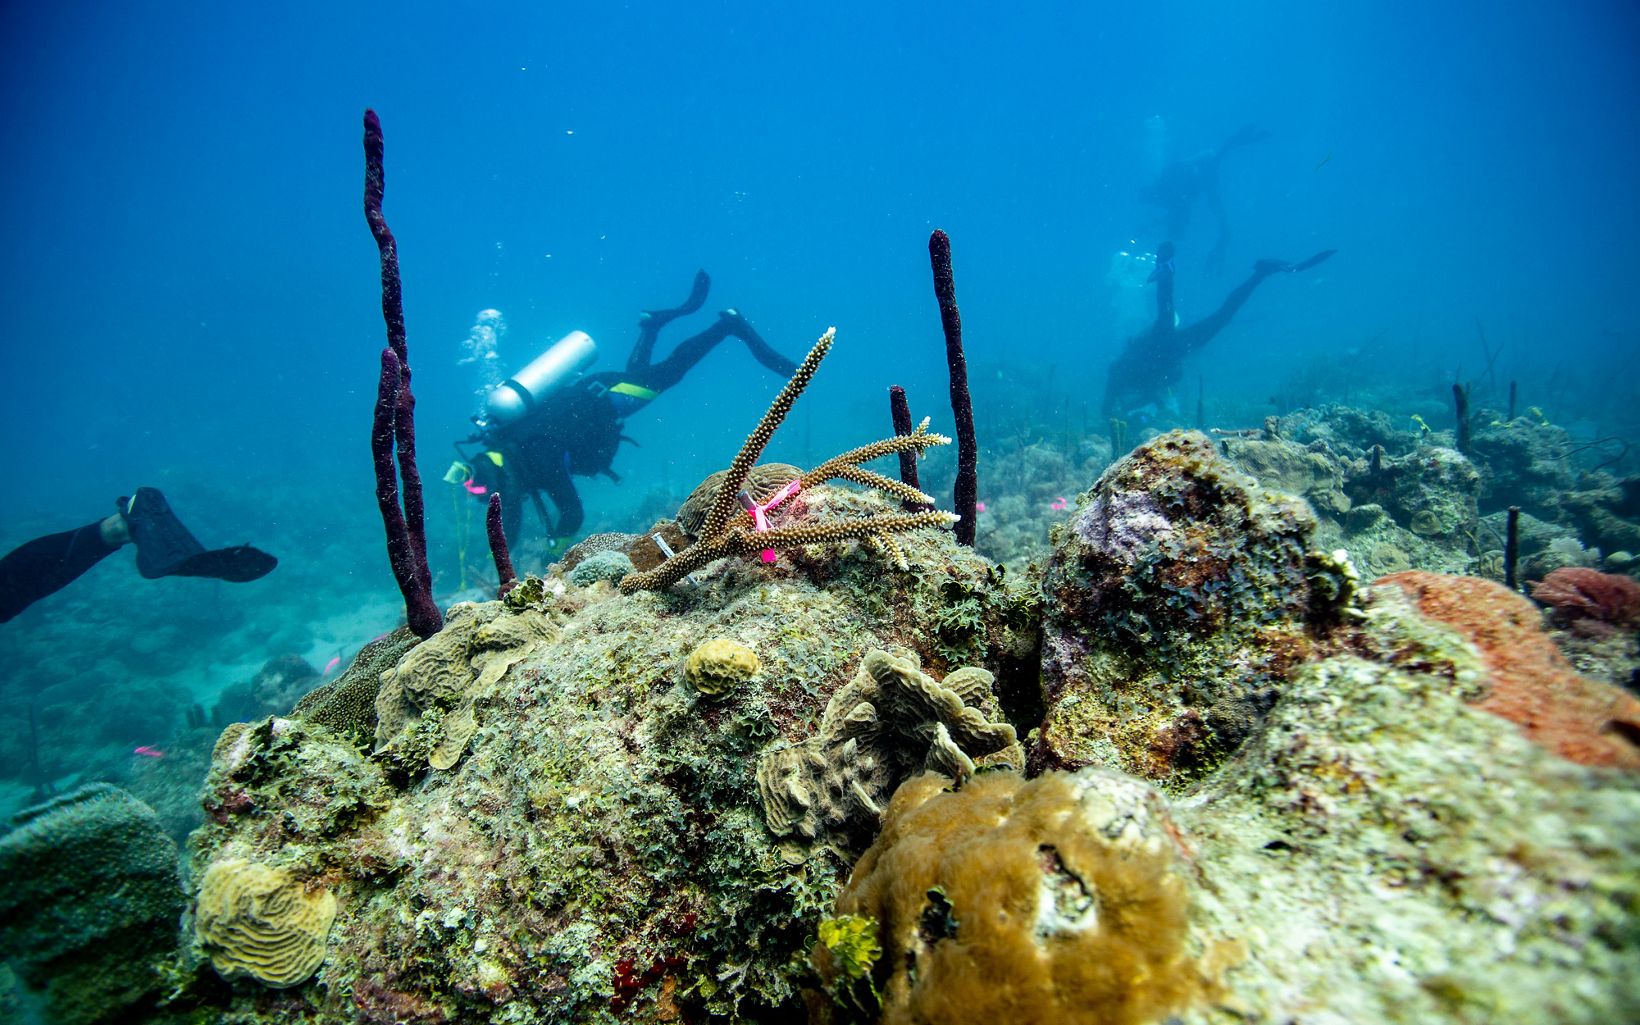 A coral fragment has been zip tied to the reef as part of restoration work.